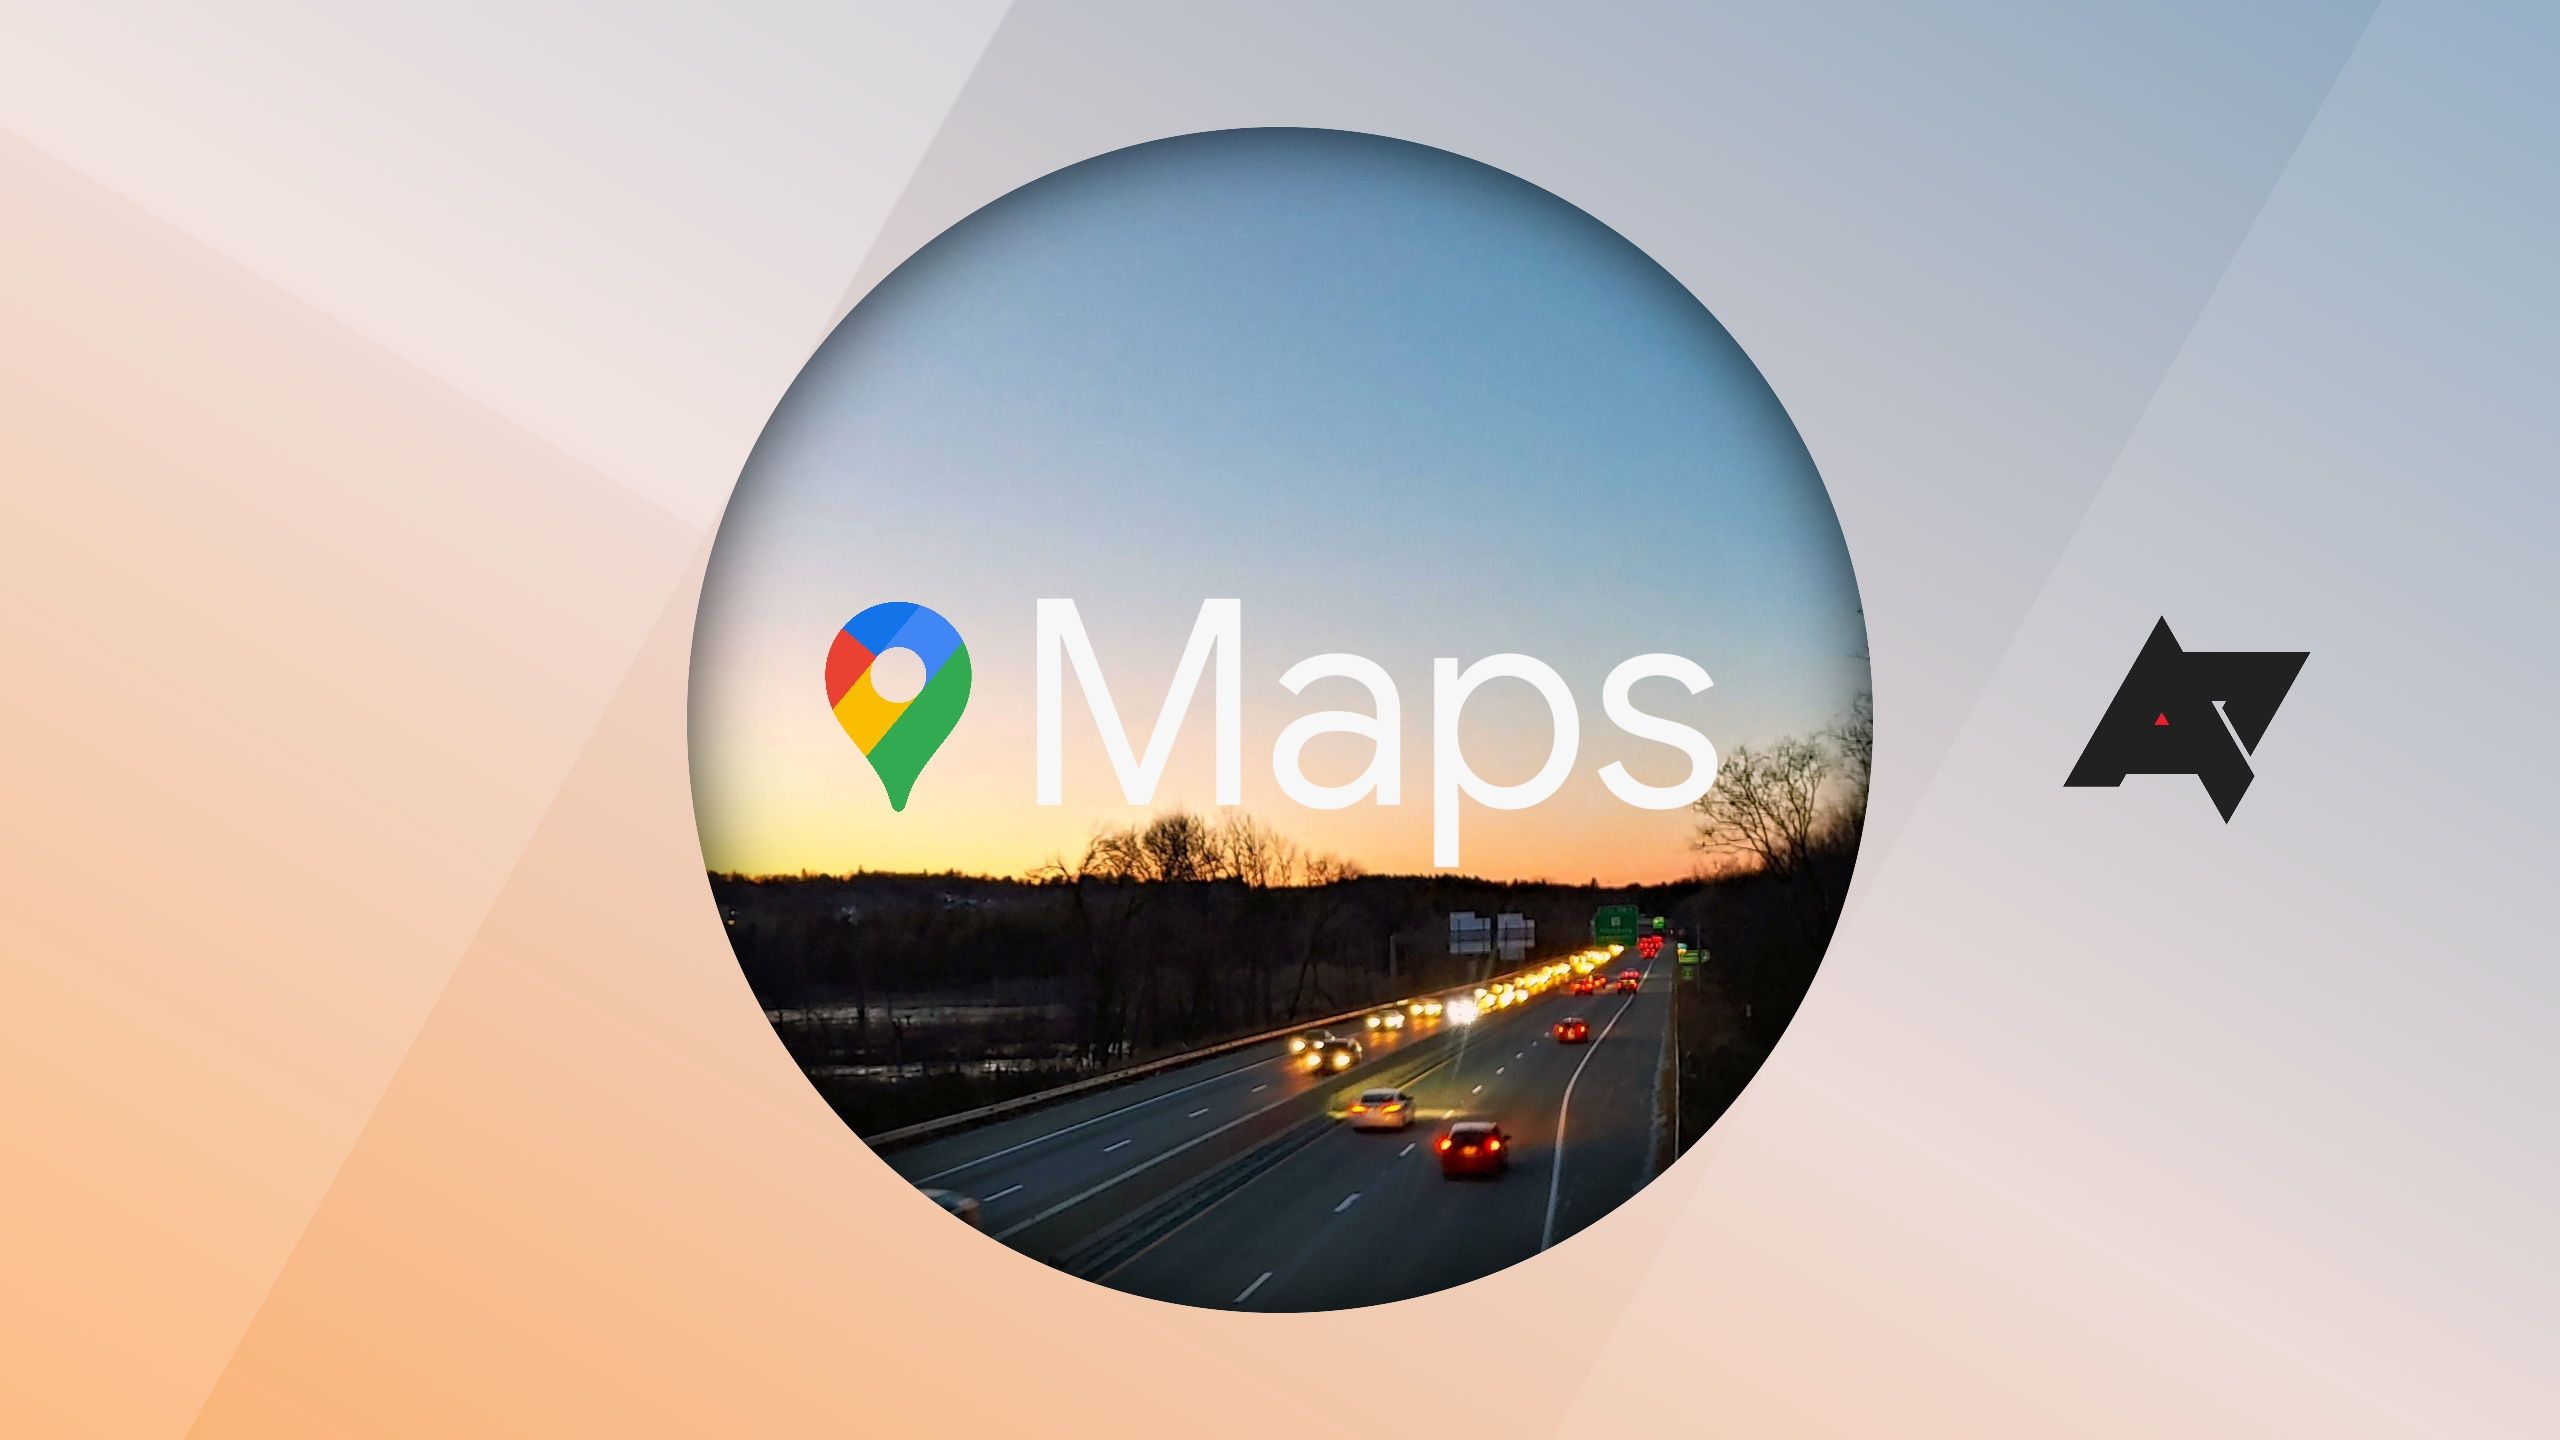 Google Maps enhances user experience with social media integration for local eateries